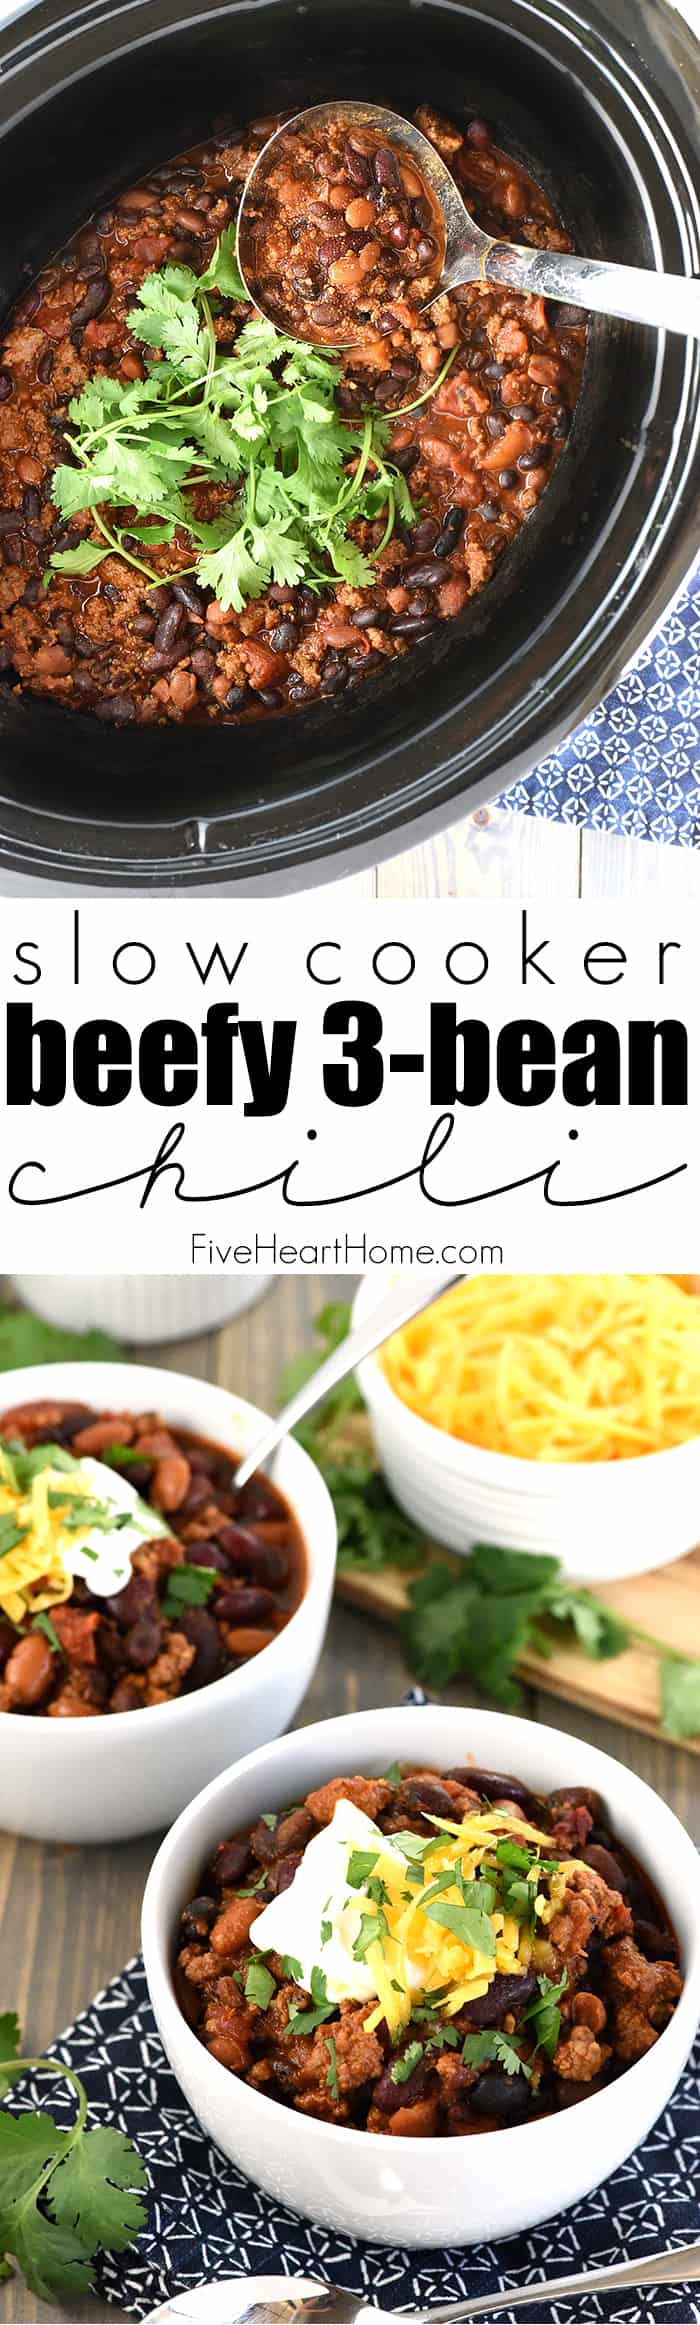 Slow Cooker Beefy Three-Bean Chili Collage with Text Overlay 